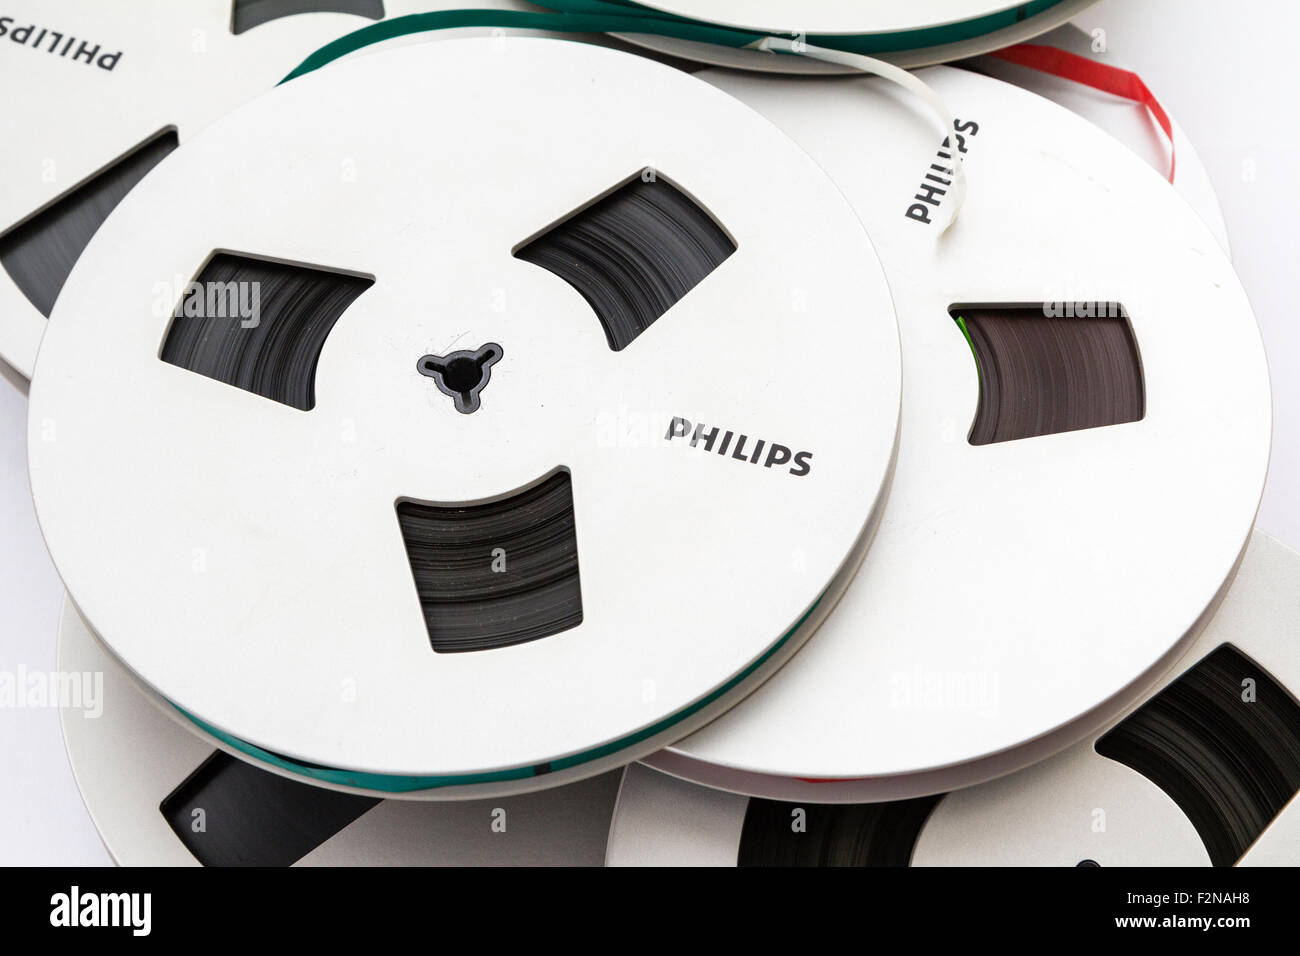 Several Philips reel to reel magnetic tape reels in a scattered pile. Close  up. Reel tape leads in red and green. Philips logo on reels Stock Photo -  Alamy